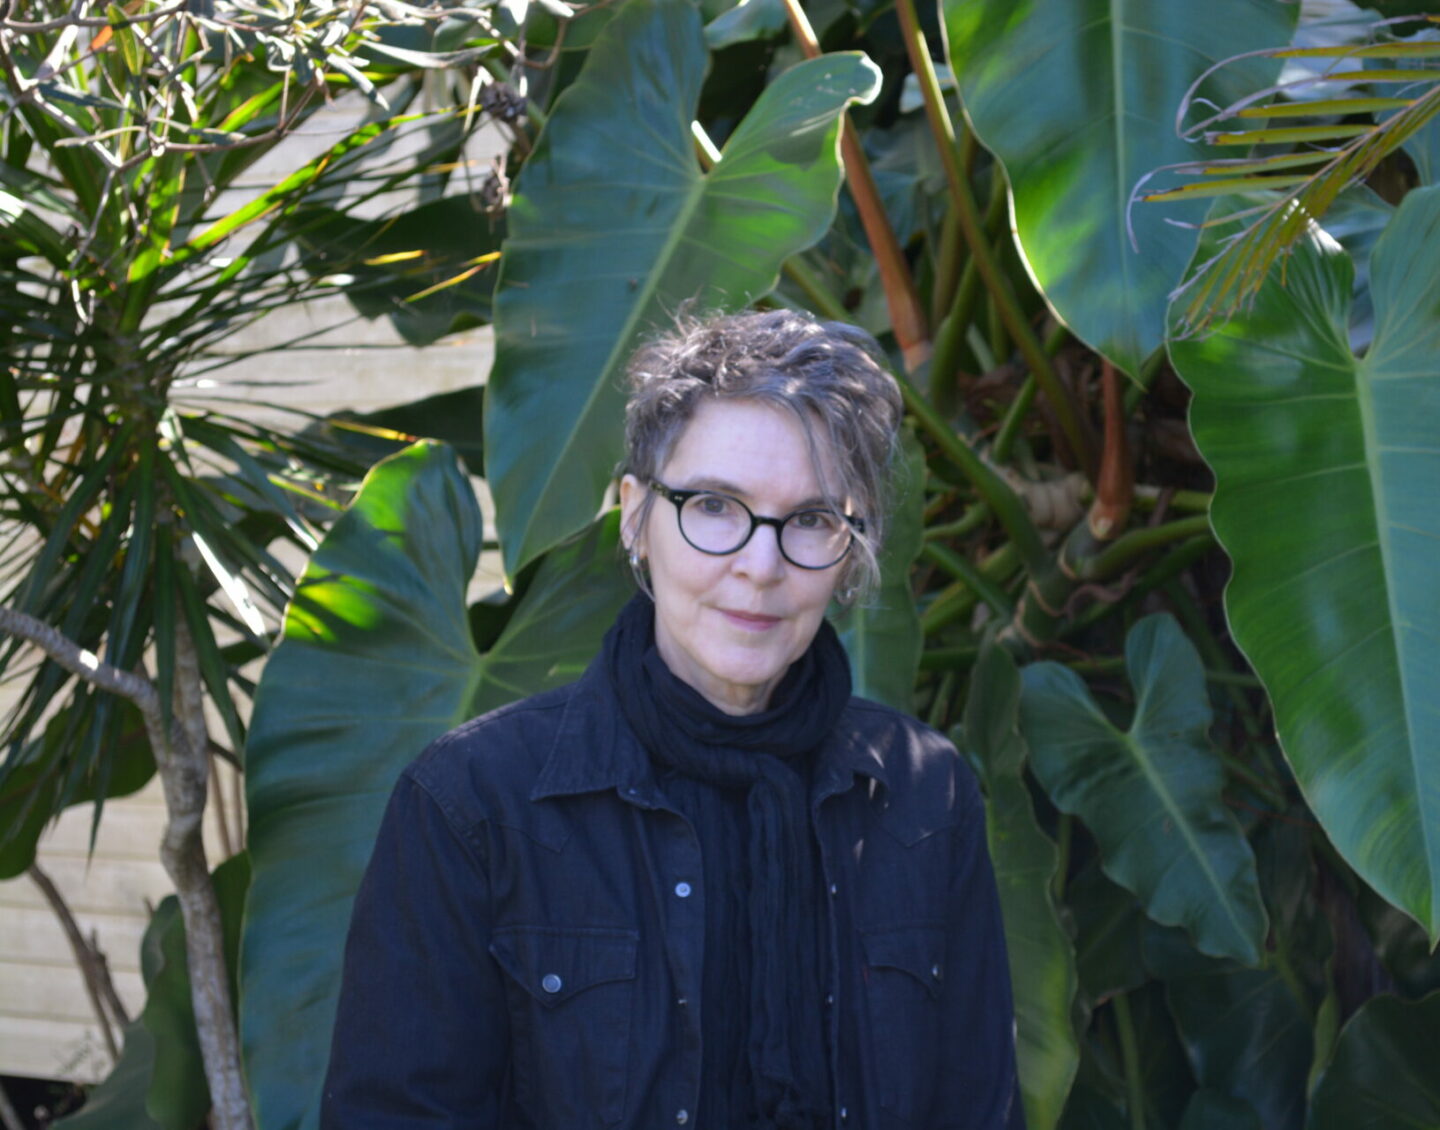 A white woman with round glasses and hair worn loosely up, standing in front of a plant with large leaves